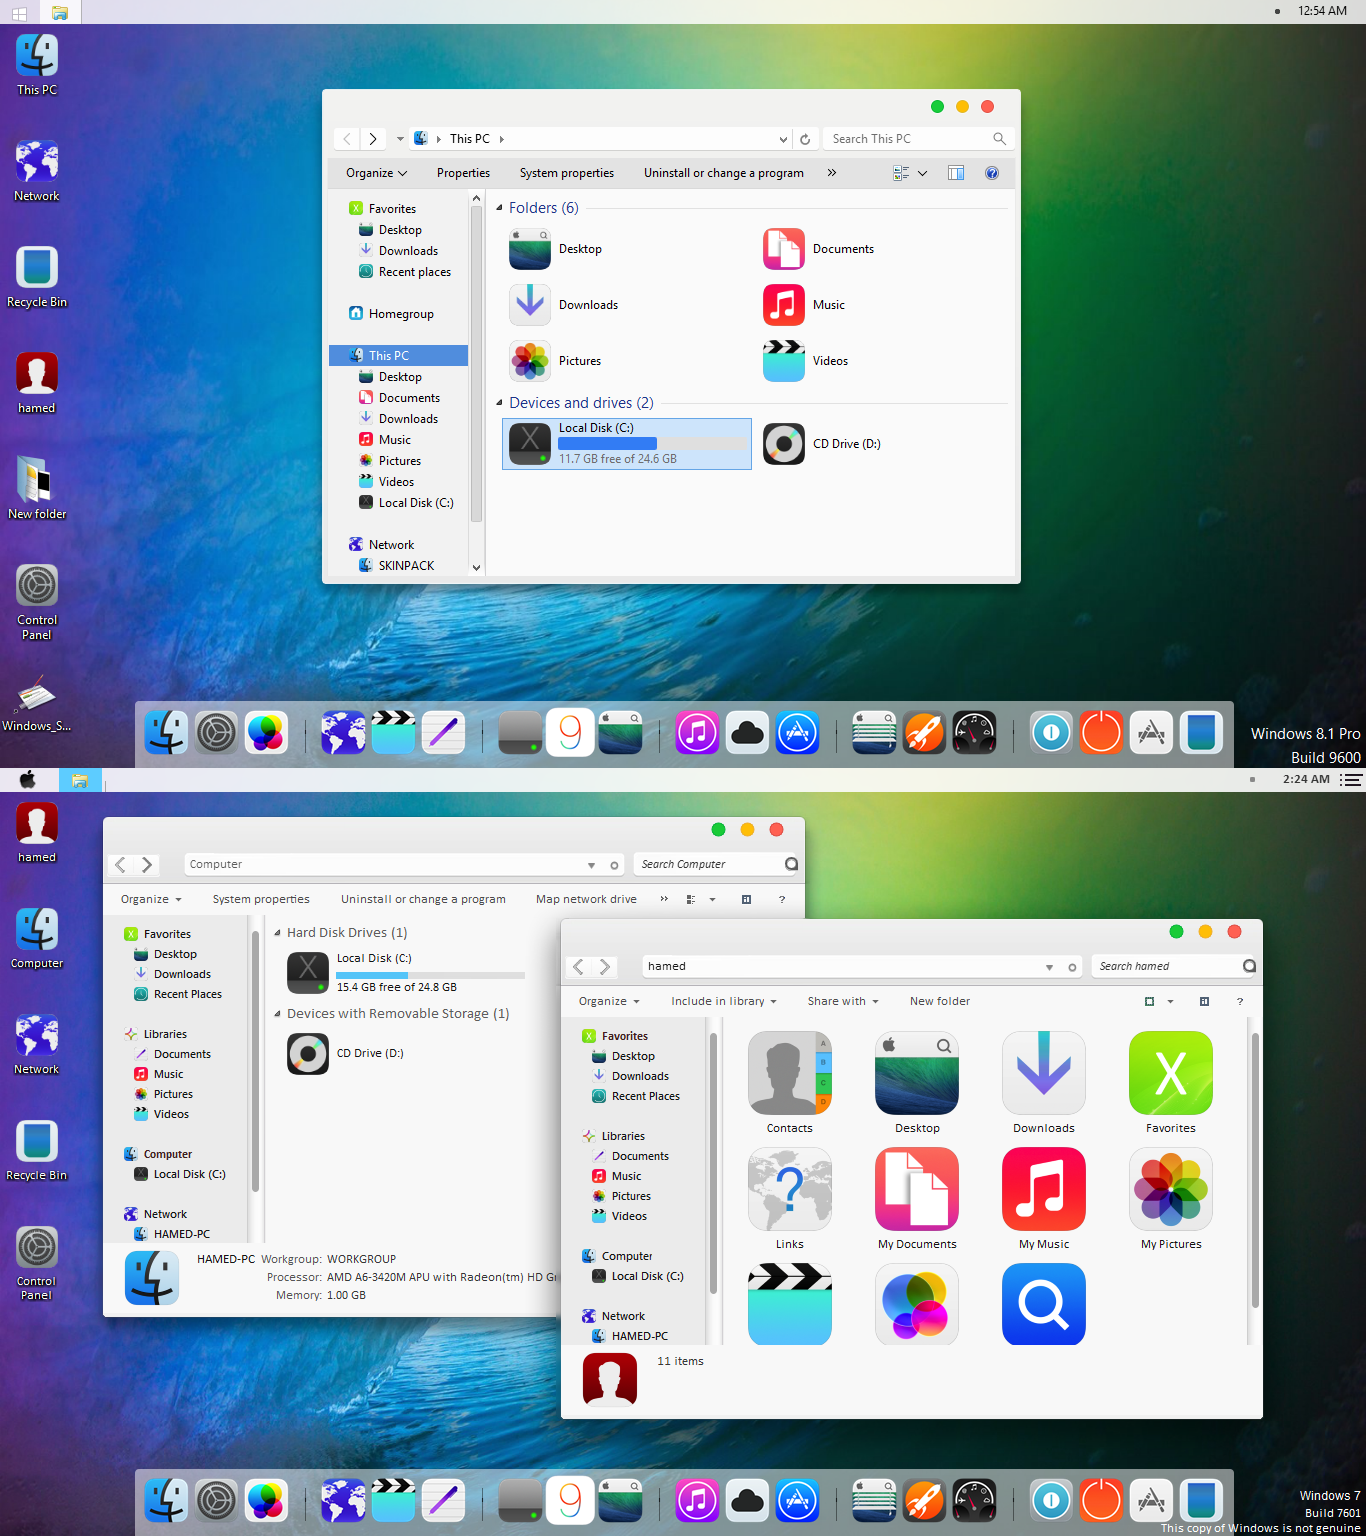 ios 11 skin pack for windows 10 free download